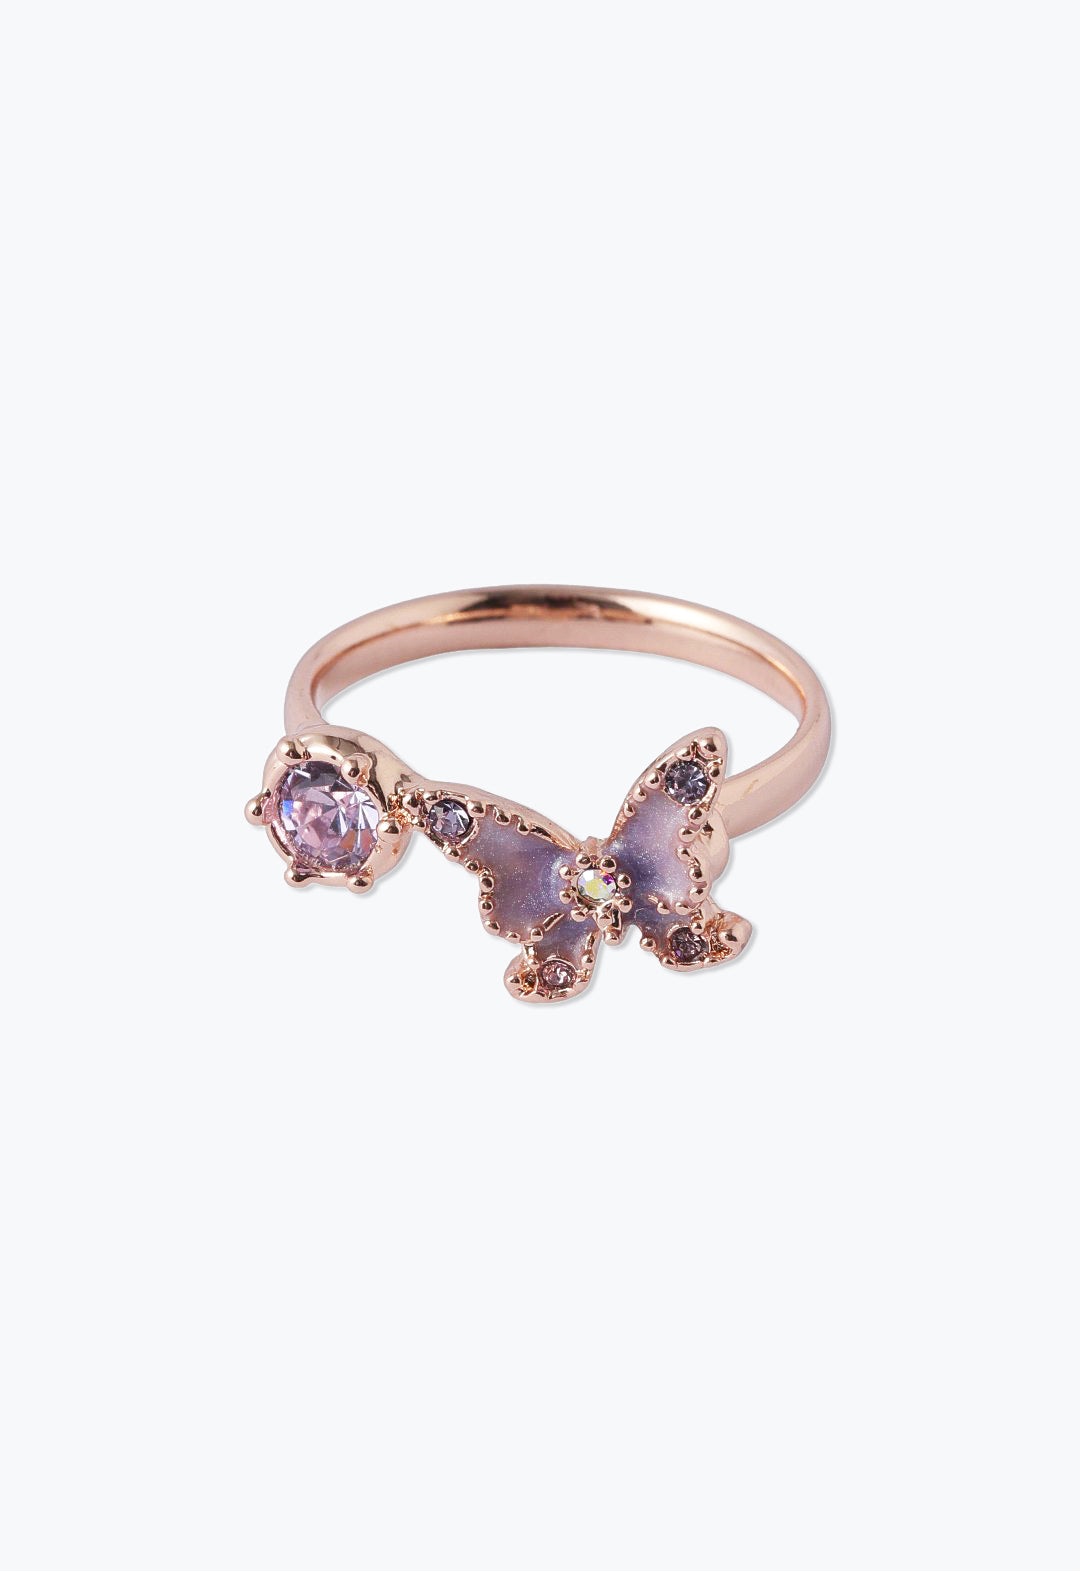 Ring single butterfly, with Purple wings Butterfly, gemstones at extremity of each, plus one on the ring flower like